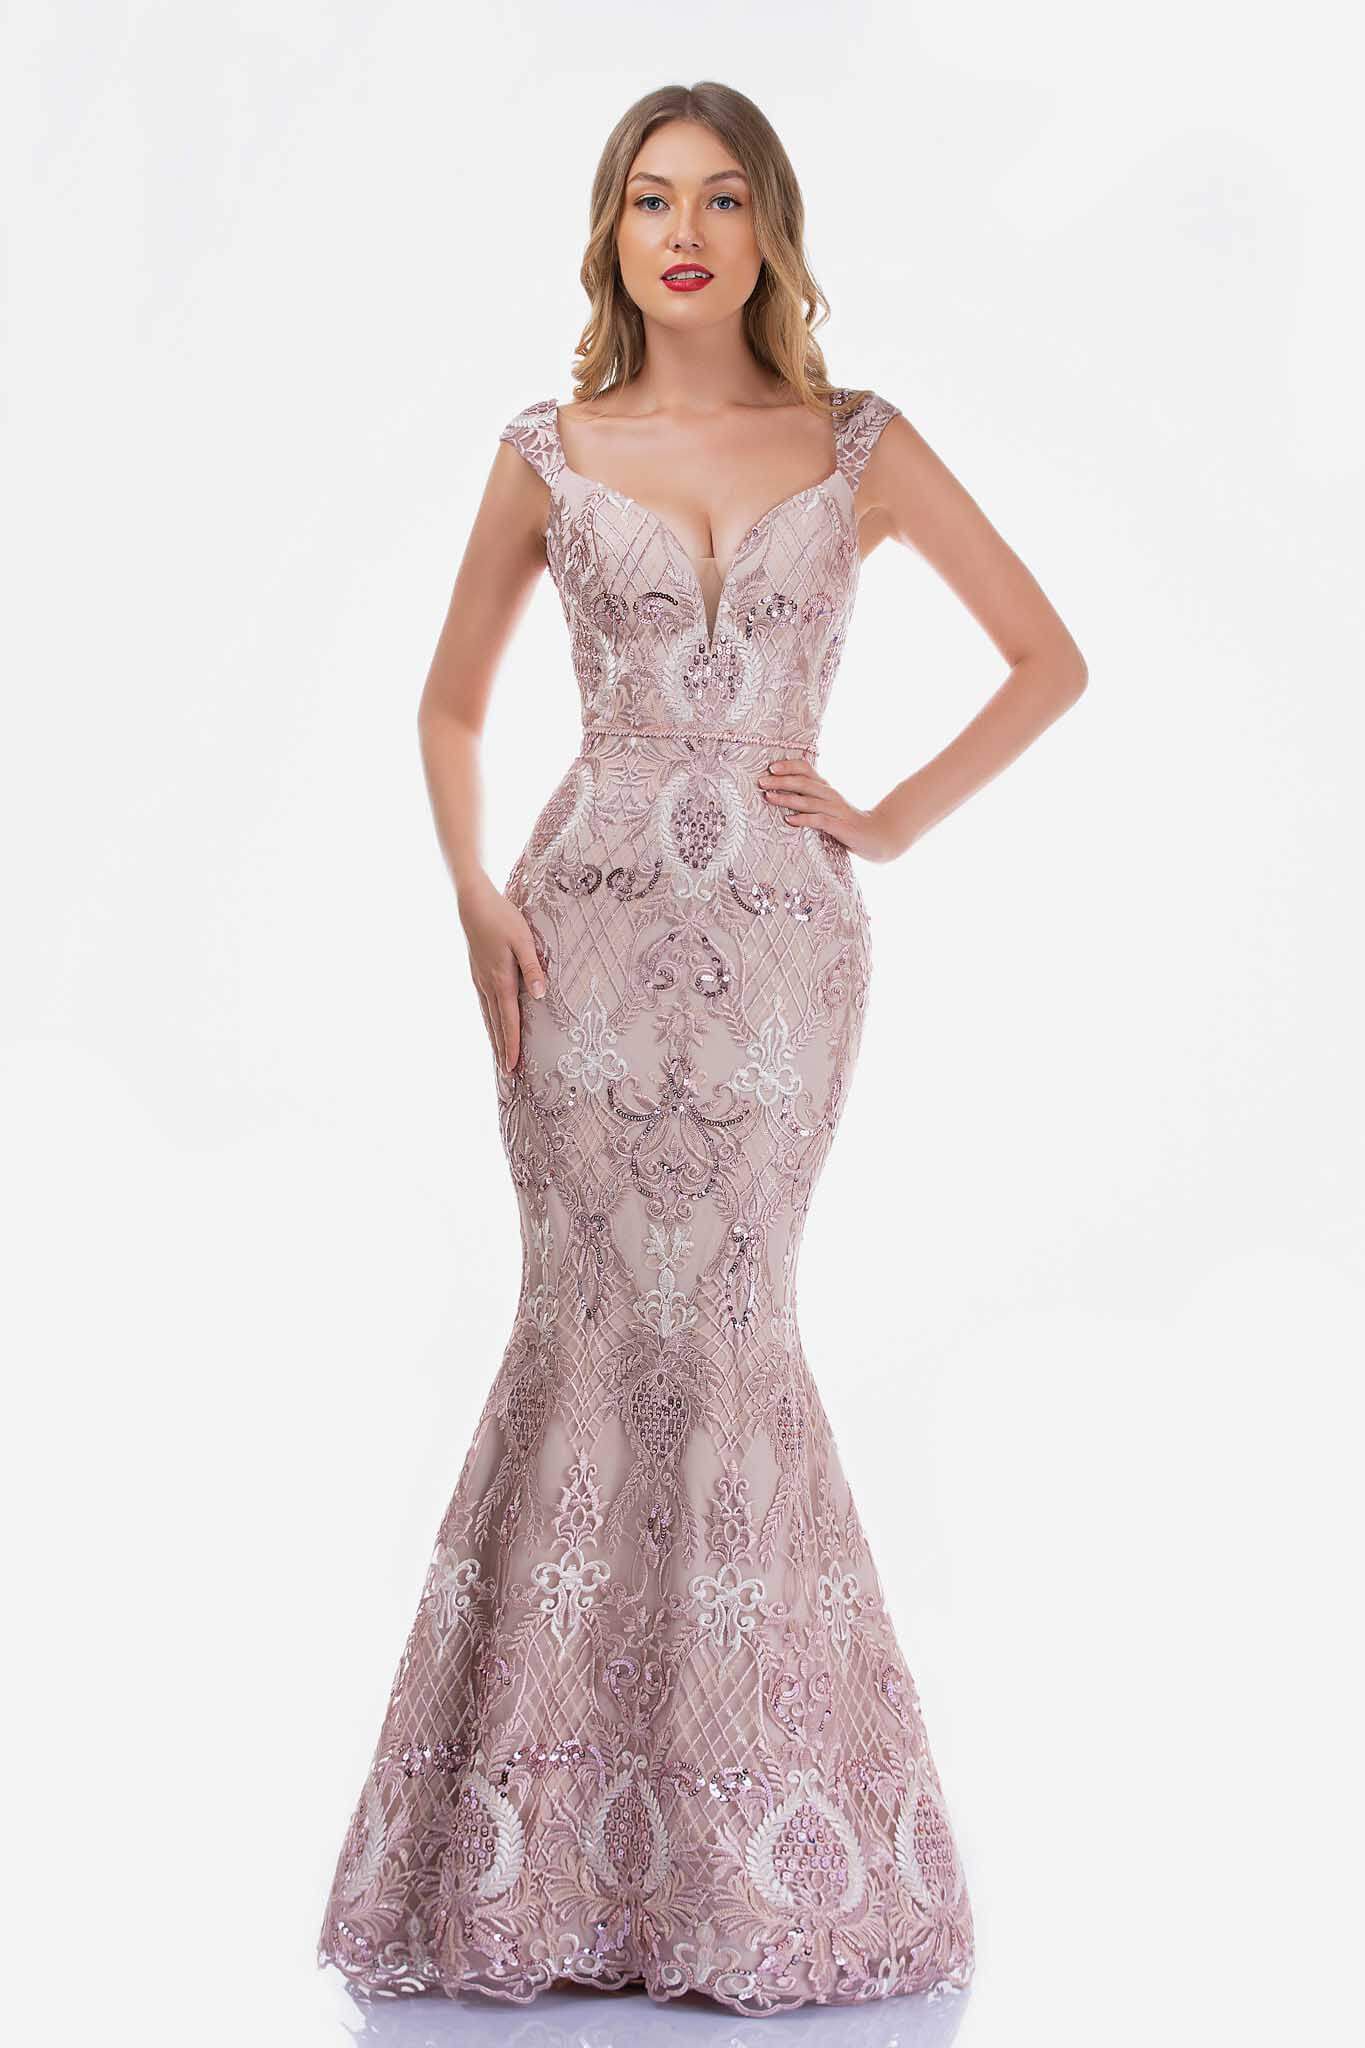 Style 2243 Nina Canacci Size 12 Prom Cap Sleeve Sequined Rose Gold Mermaid Dress on Queenly